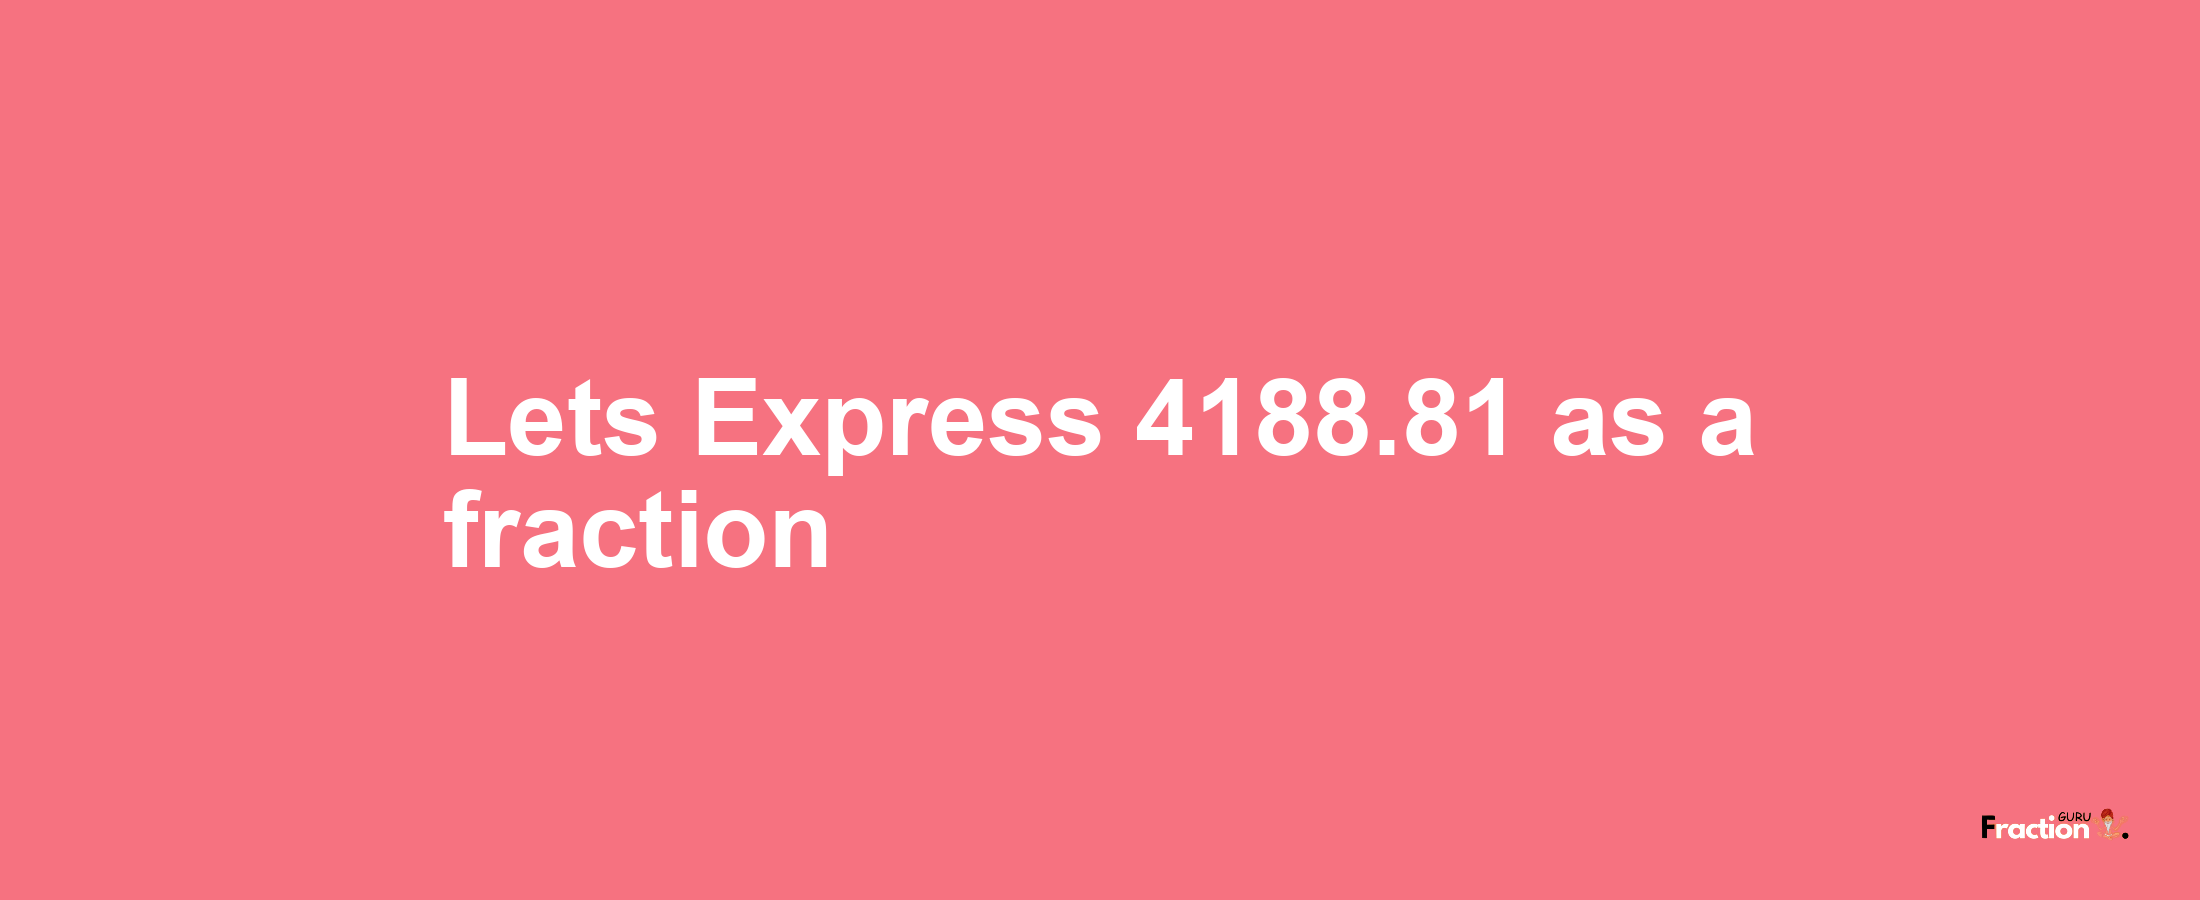 Lets Express 4188.81 as afraction